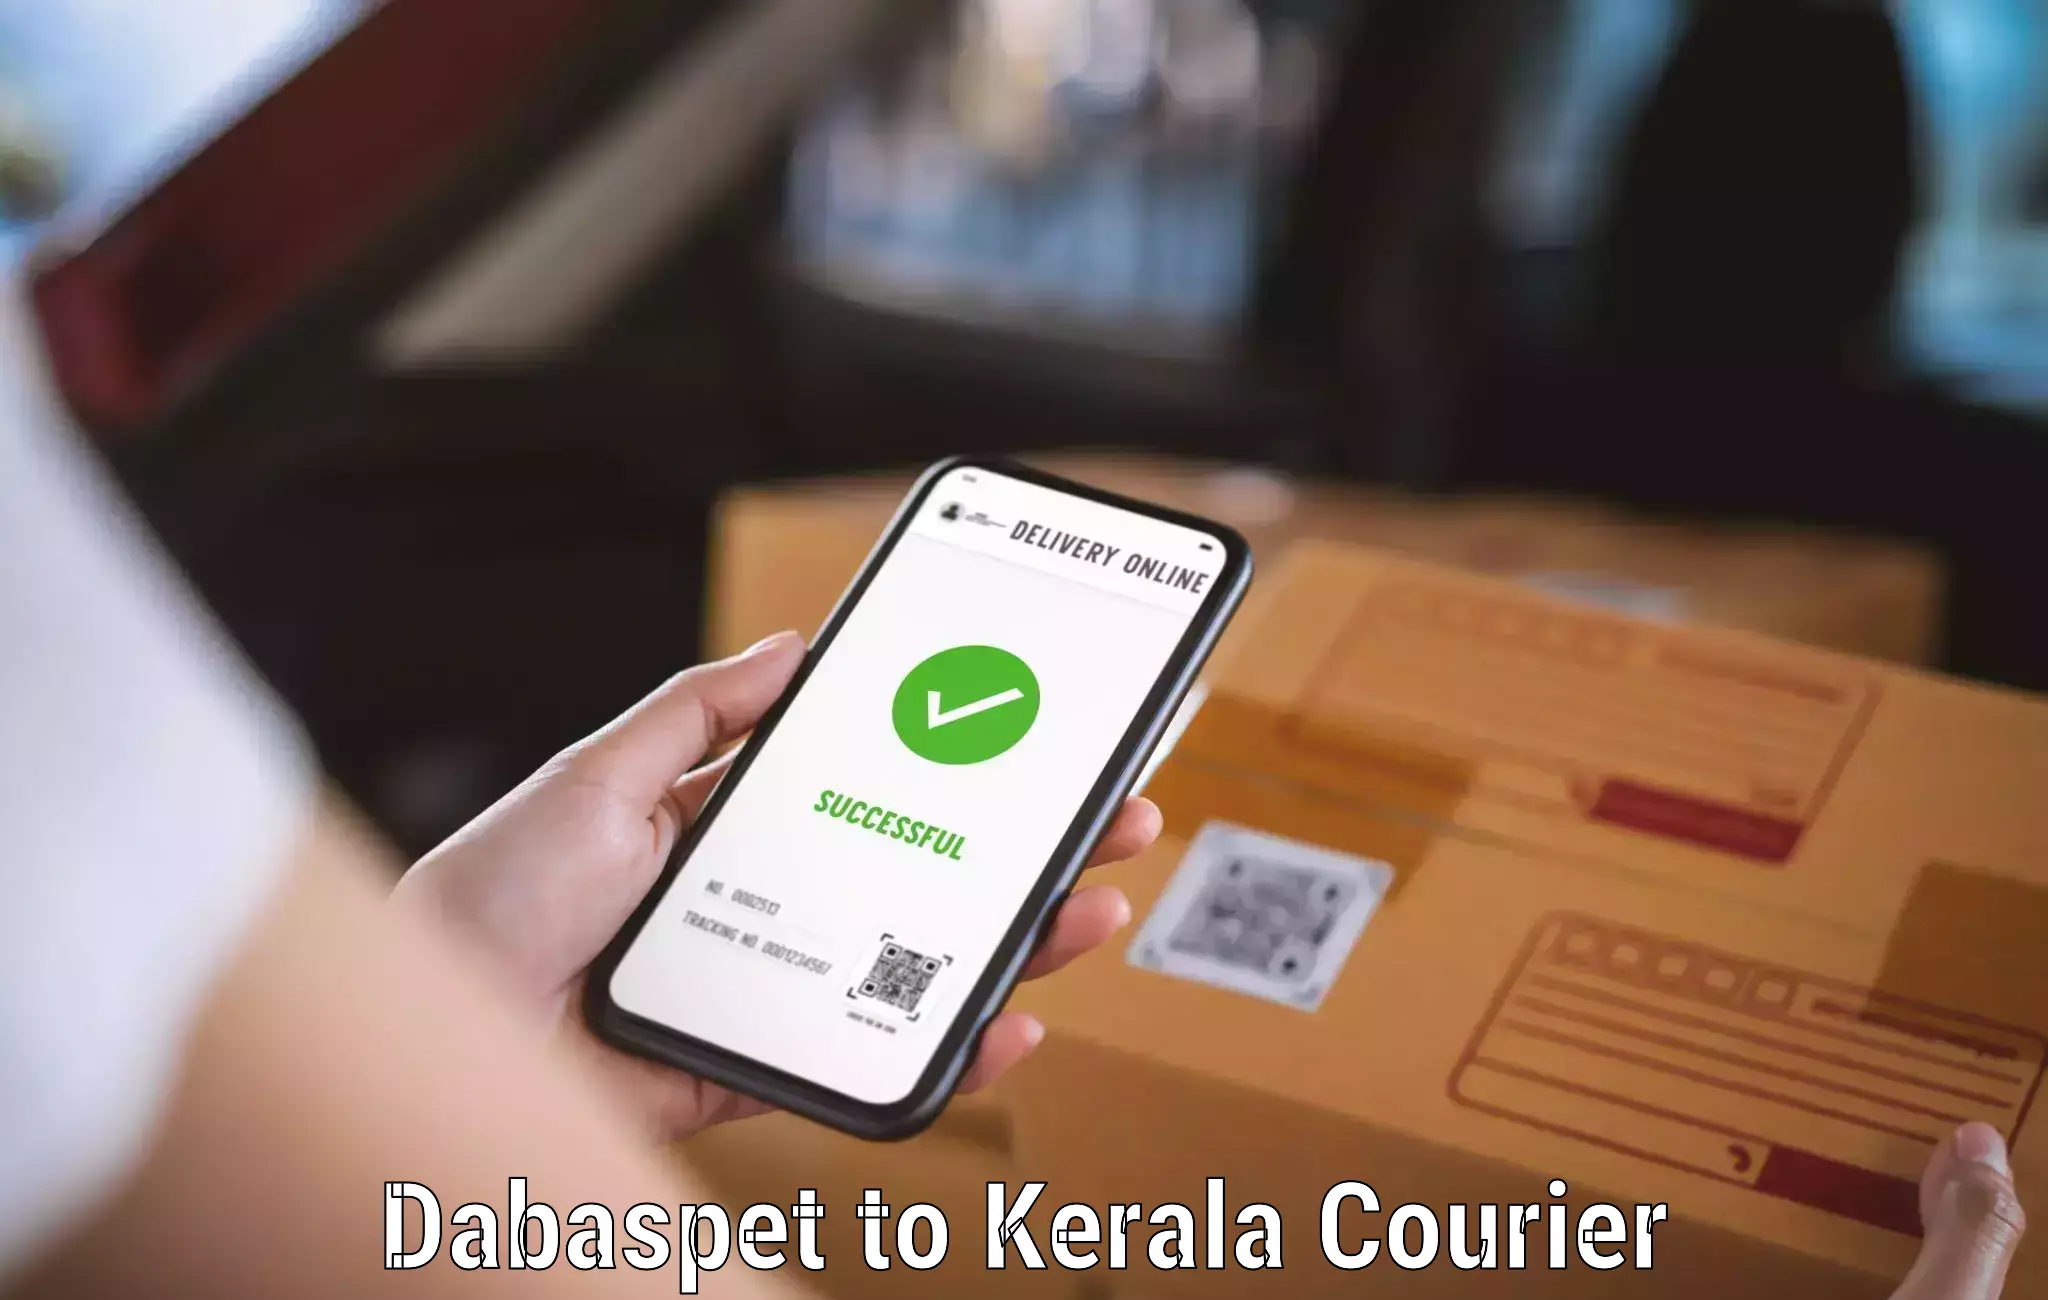 Courier service booking Dabaspet to Chavara